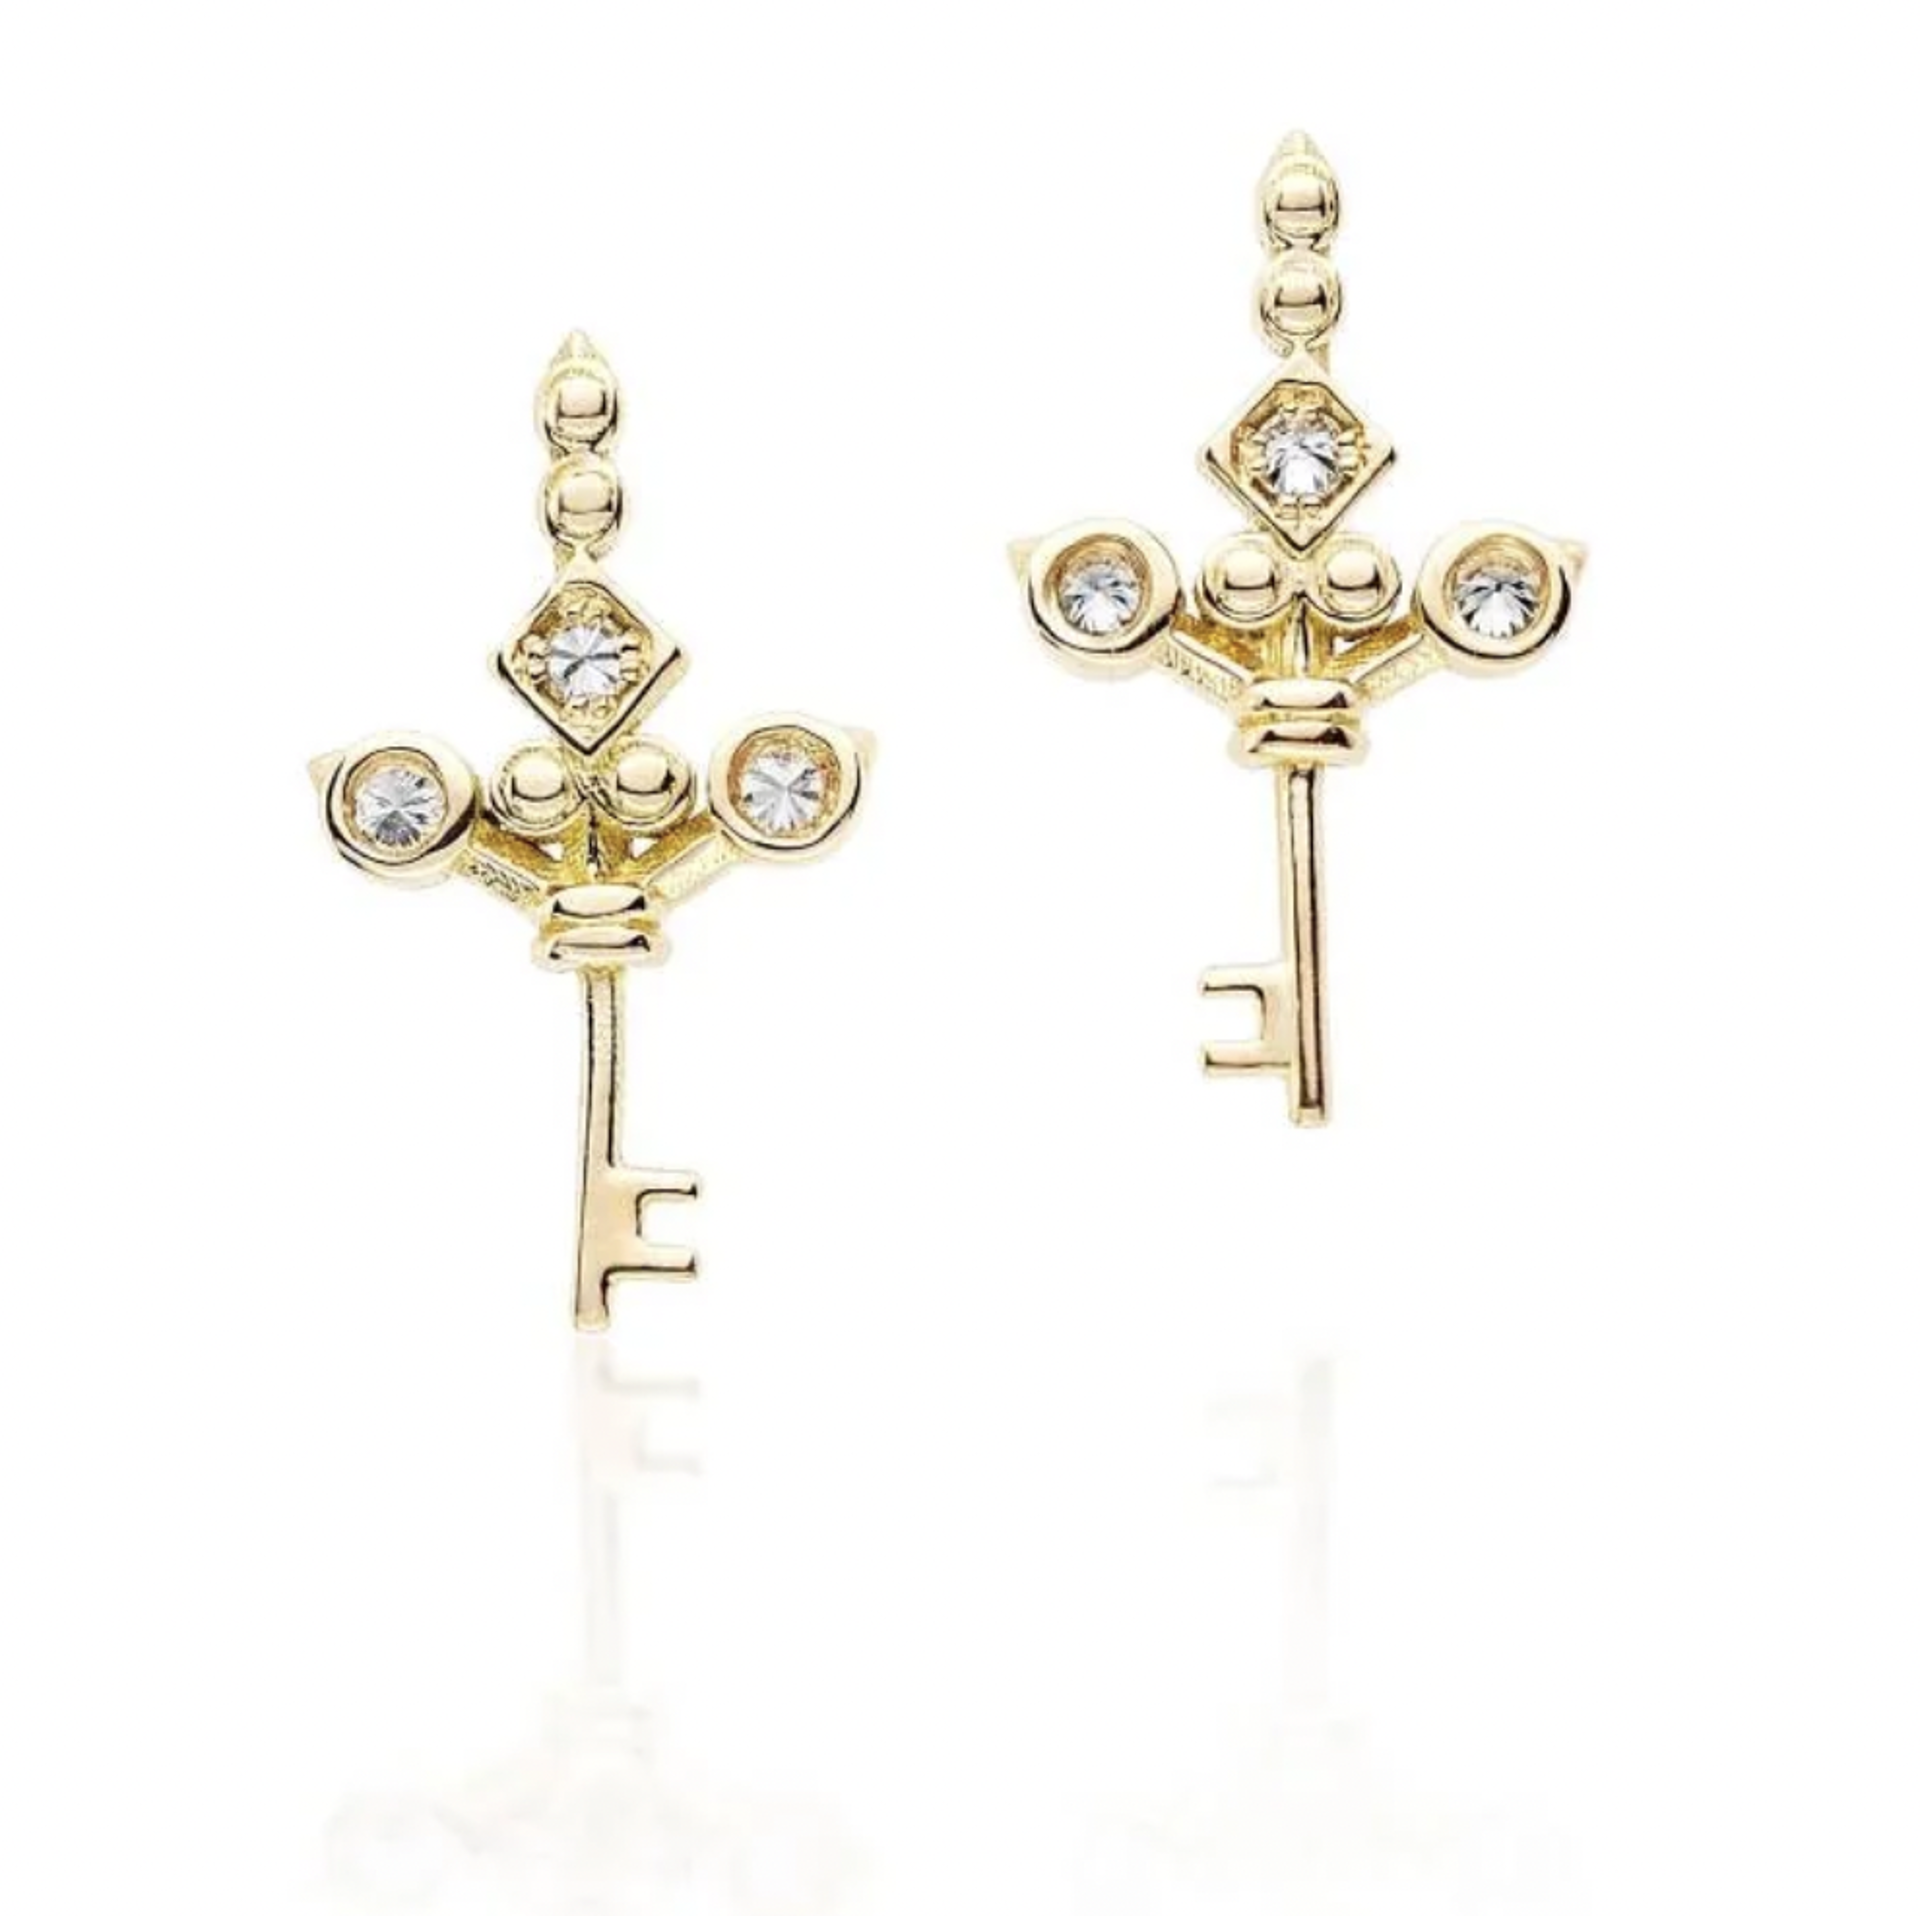 Impeccable Words Yellow Gold Love Key Studs by Ana Katarina